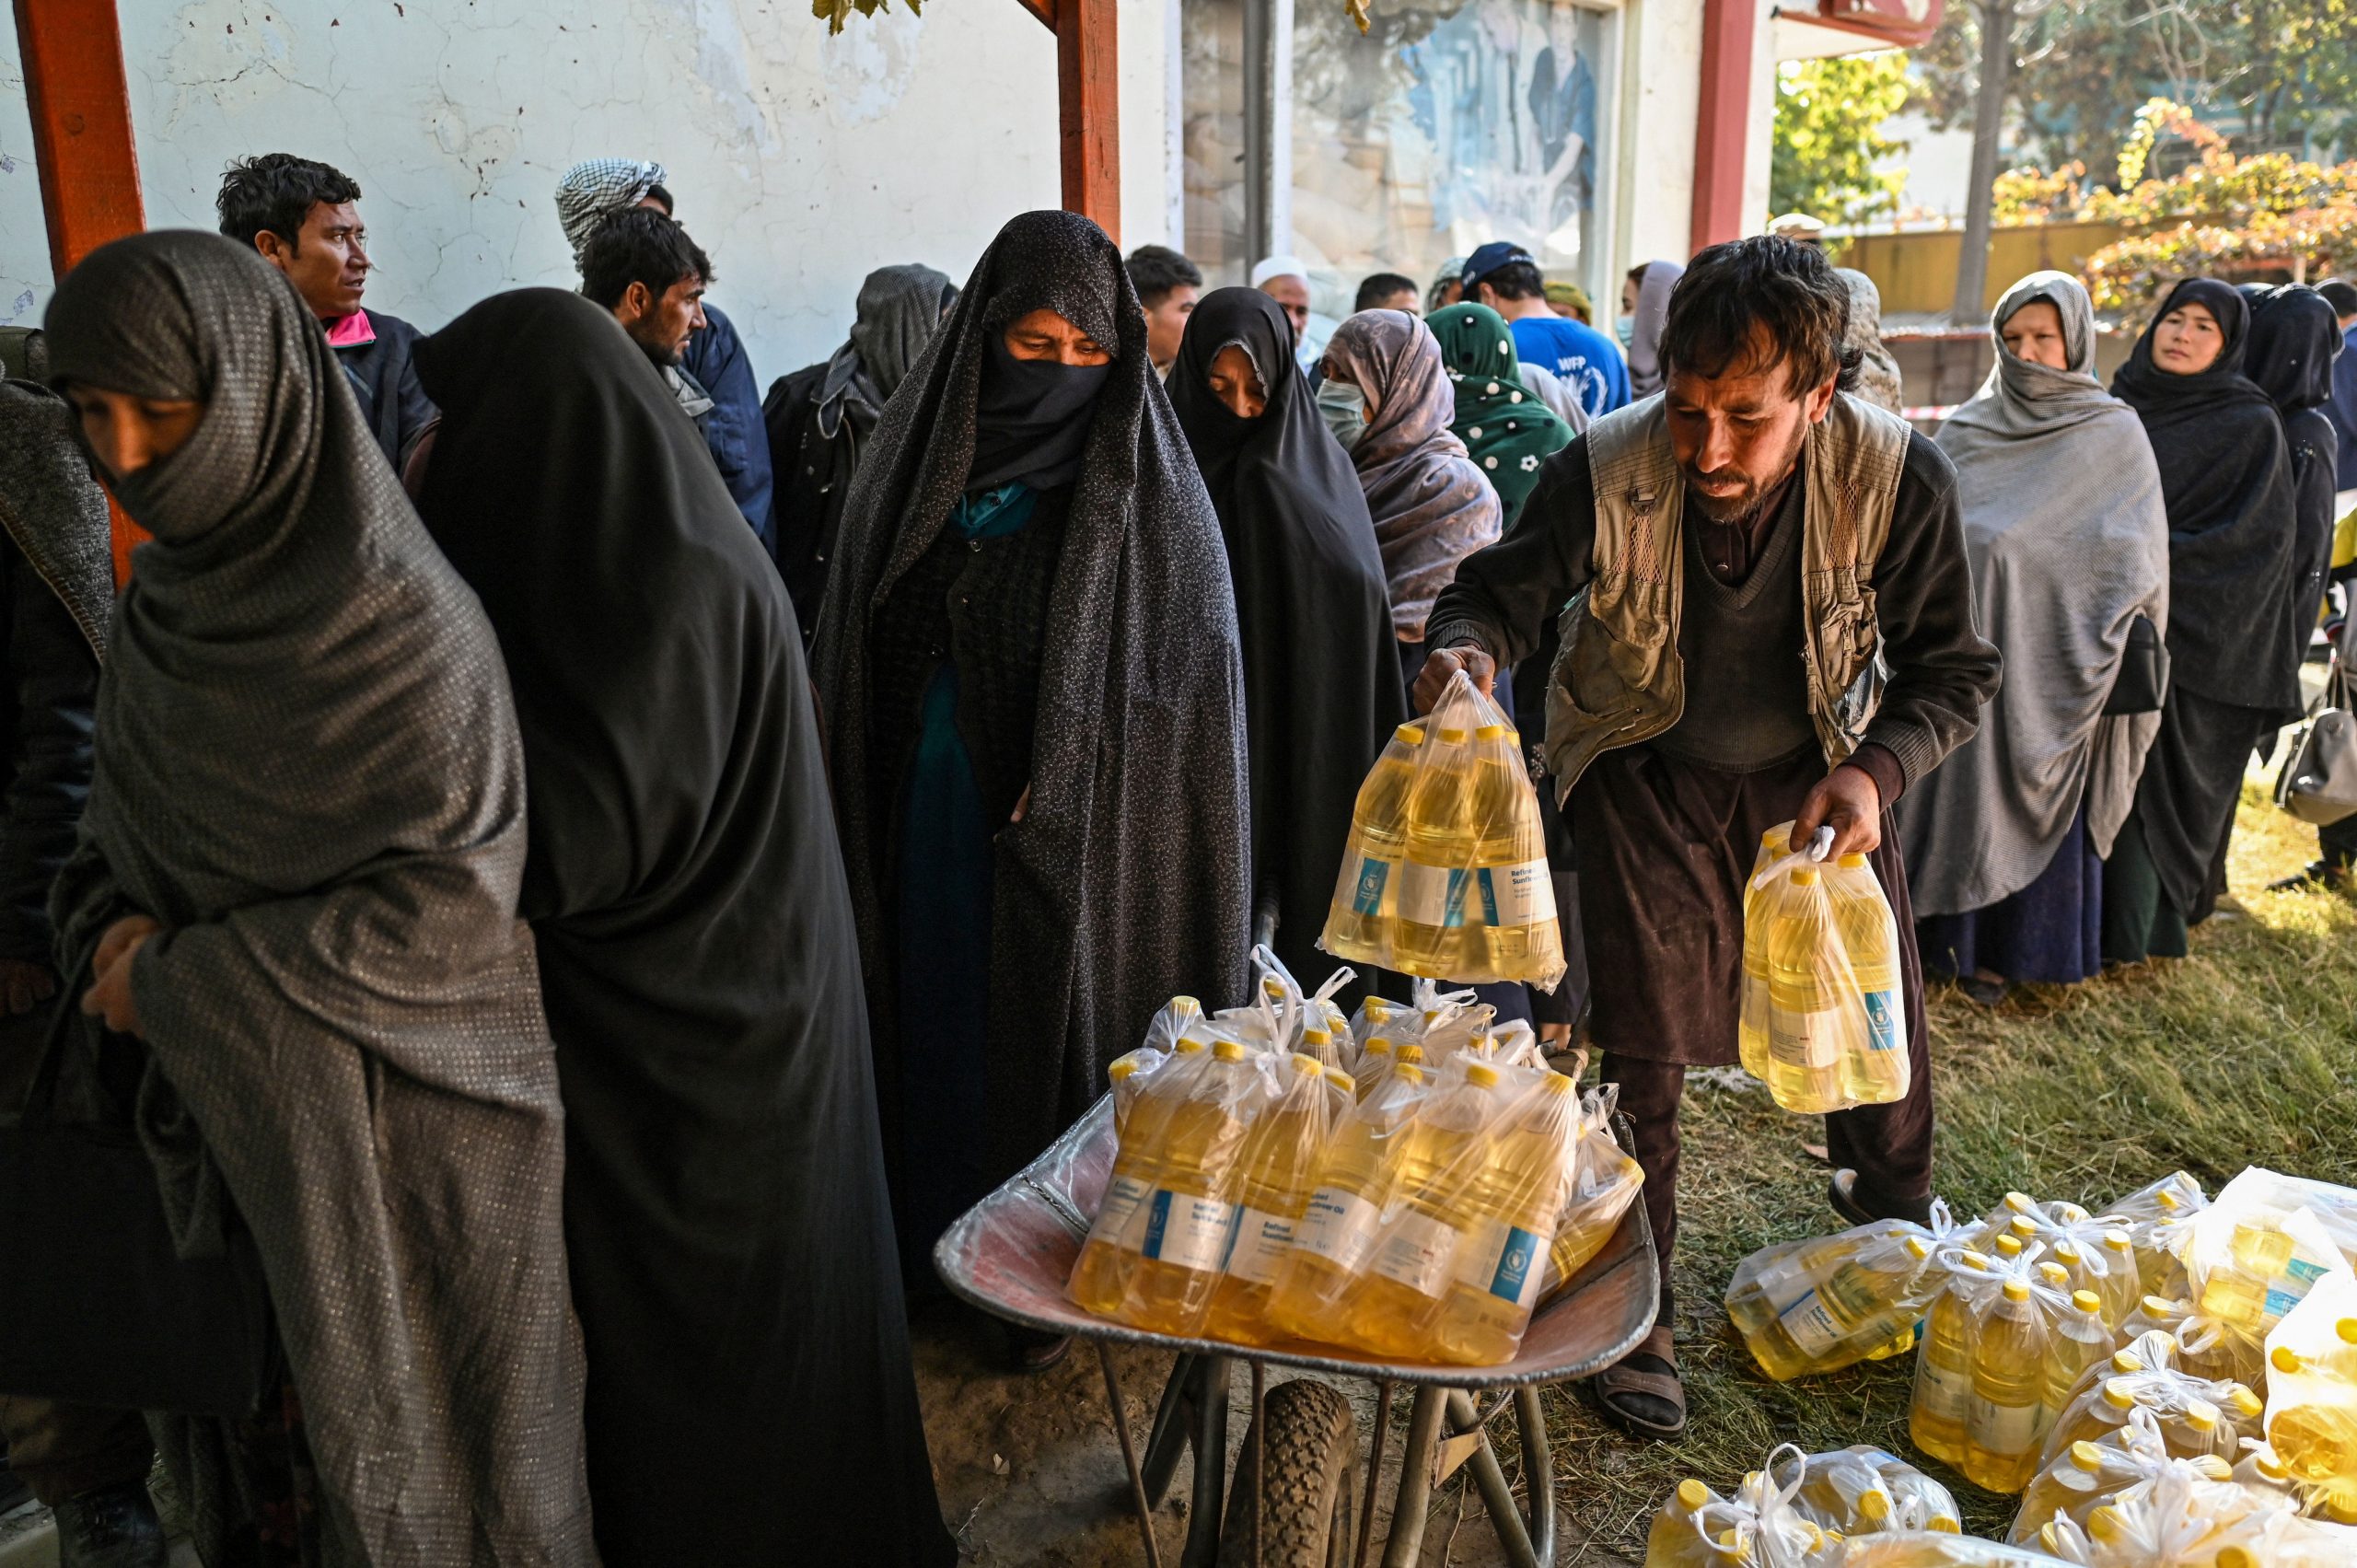 Half a dozen veiled and covered women stand in line as several men with uncovered faces handle food donations.